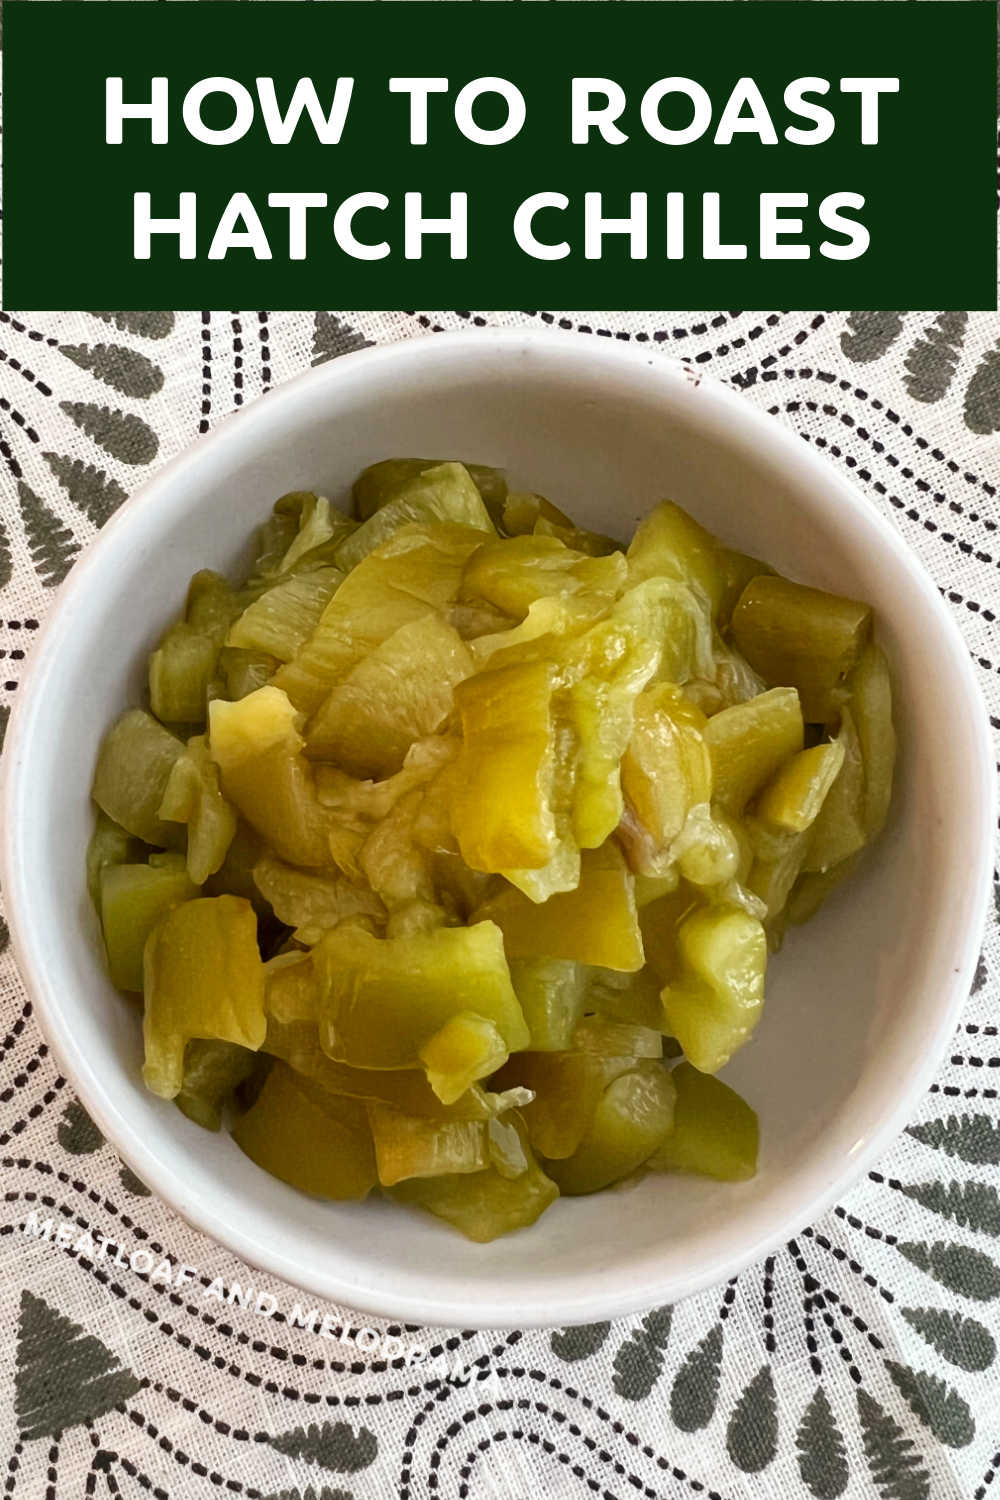 Learn how to roast hatch chiles in the oven and make your own diced roasted green chiles to use in your favorite recipes. Easy to freeze for later, so you can make the most of Hatch chile season! via @meamel